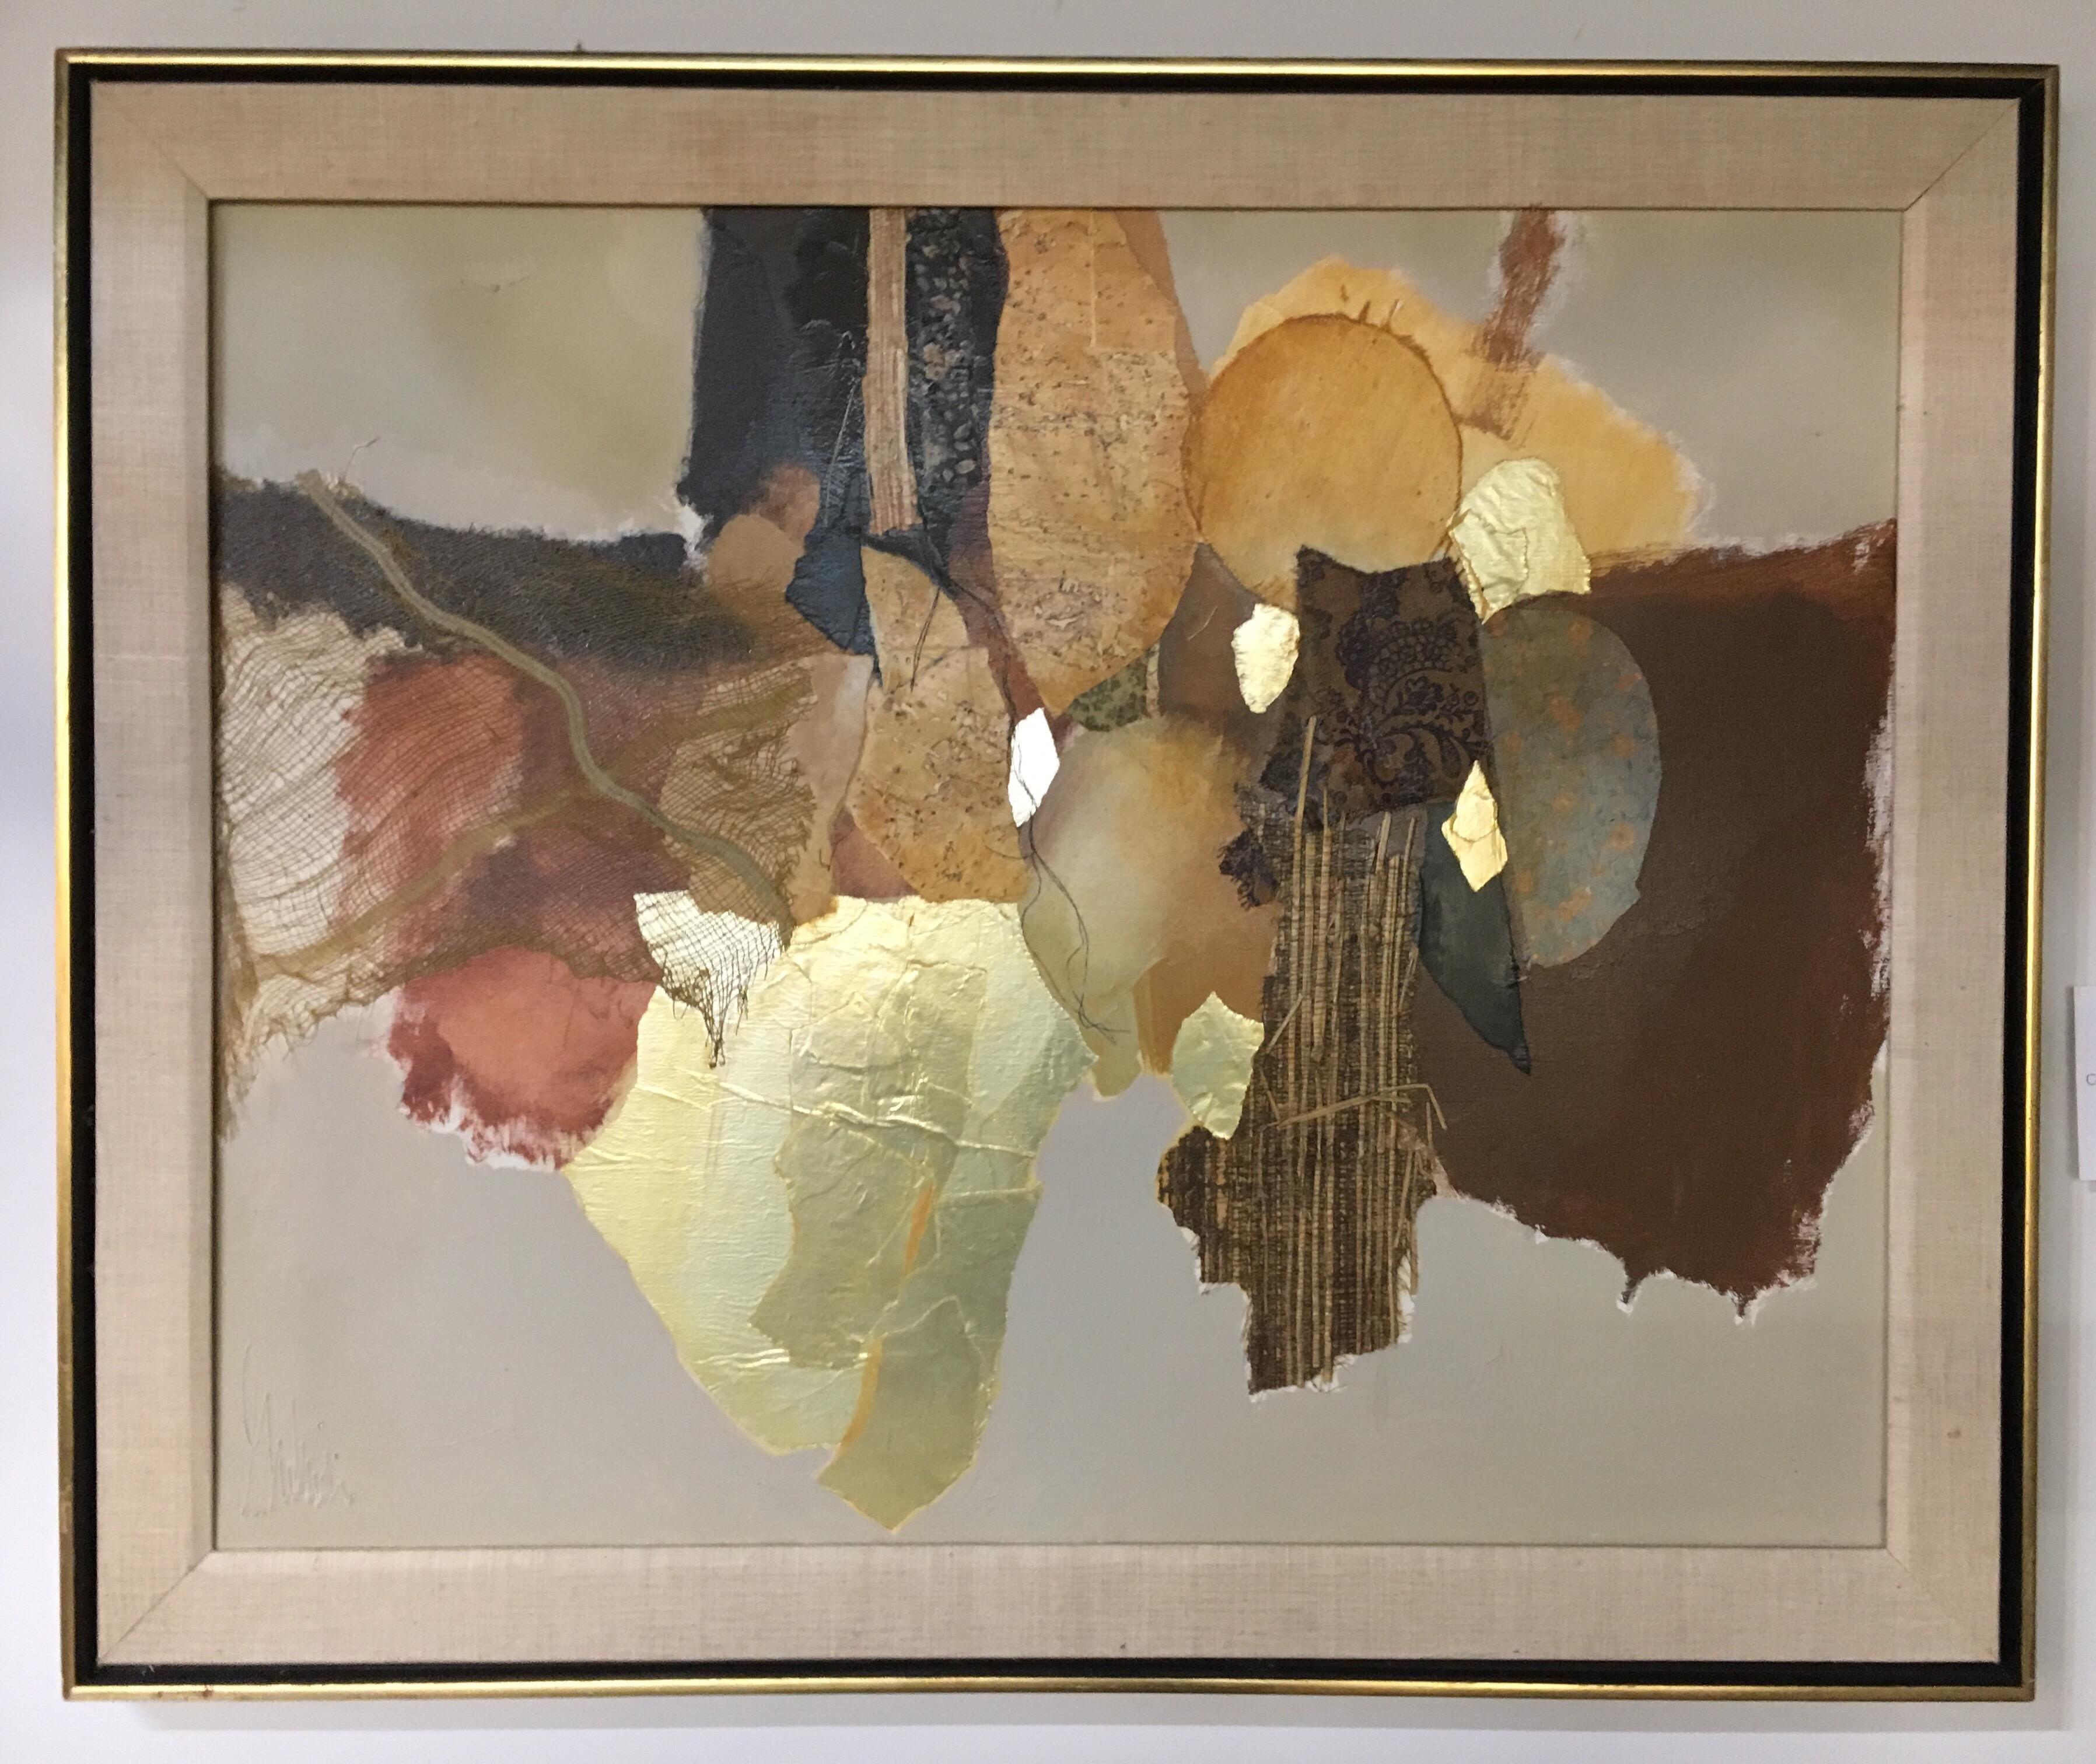 Part of a suite of four original mixed-media paintings. The artist's signature is on the lower part of the canvas but is illegible. We have been told that these original works of art hung at the Parsons school of design in NYC for several years but